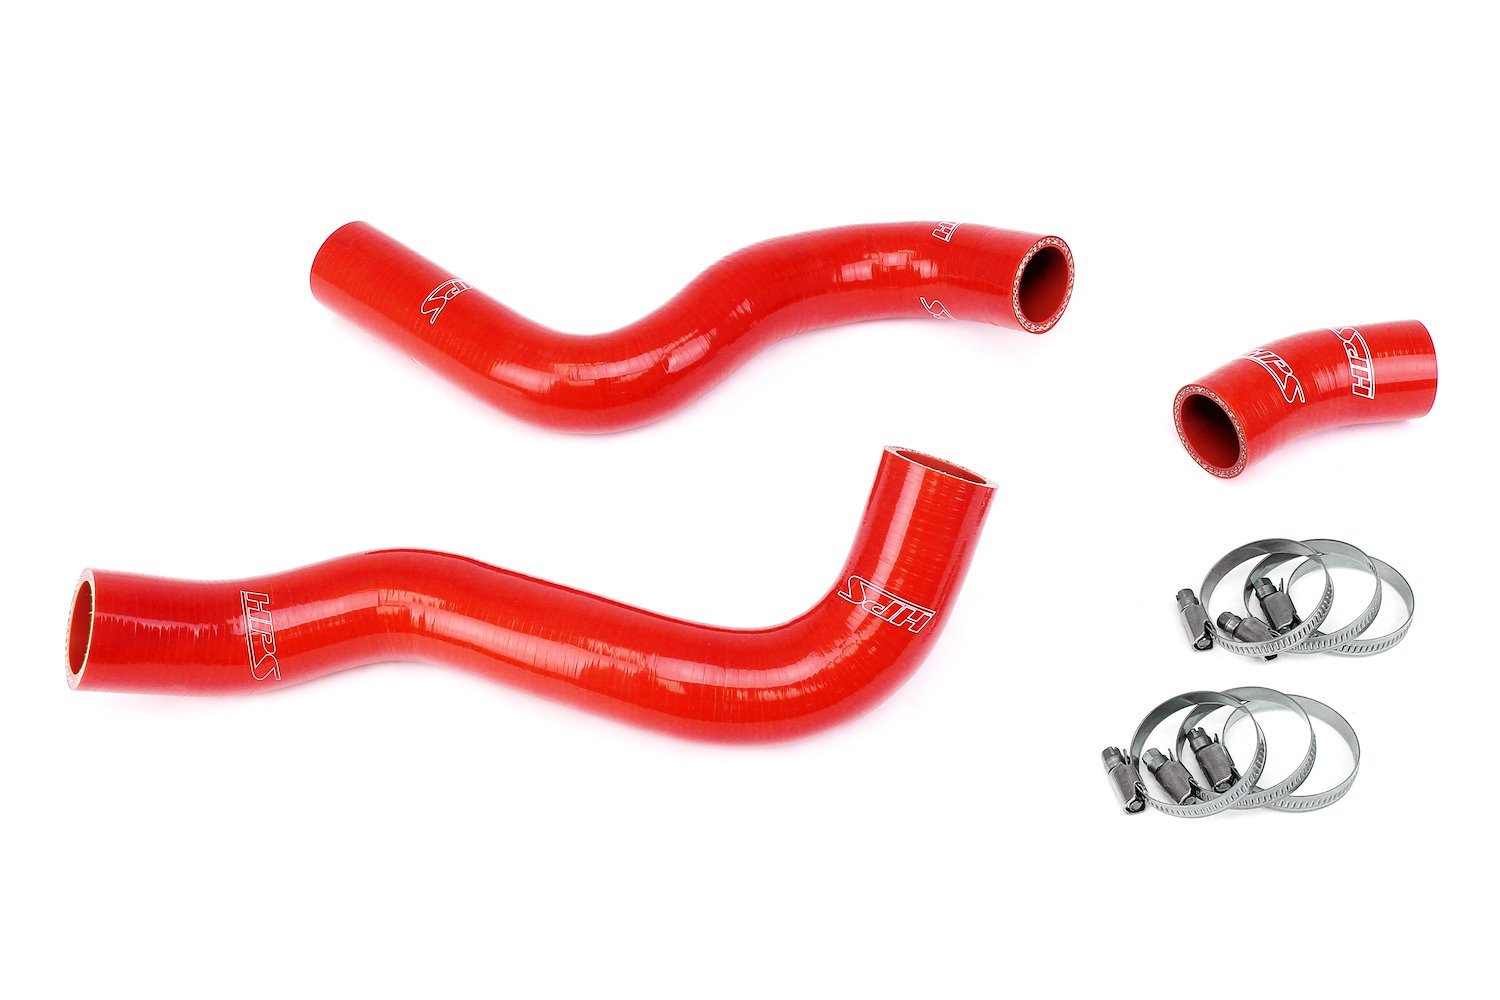 57-2055-RED Radiator Hose Kit, 3-Ply Reinforced Silicone, Replaces Rubber Radiator Coolant Hoses